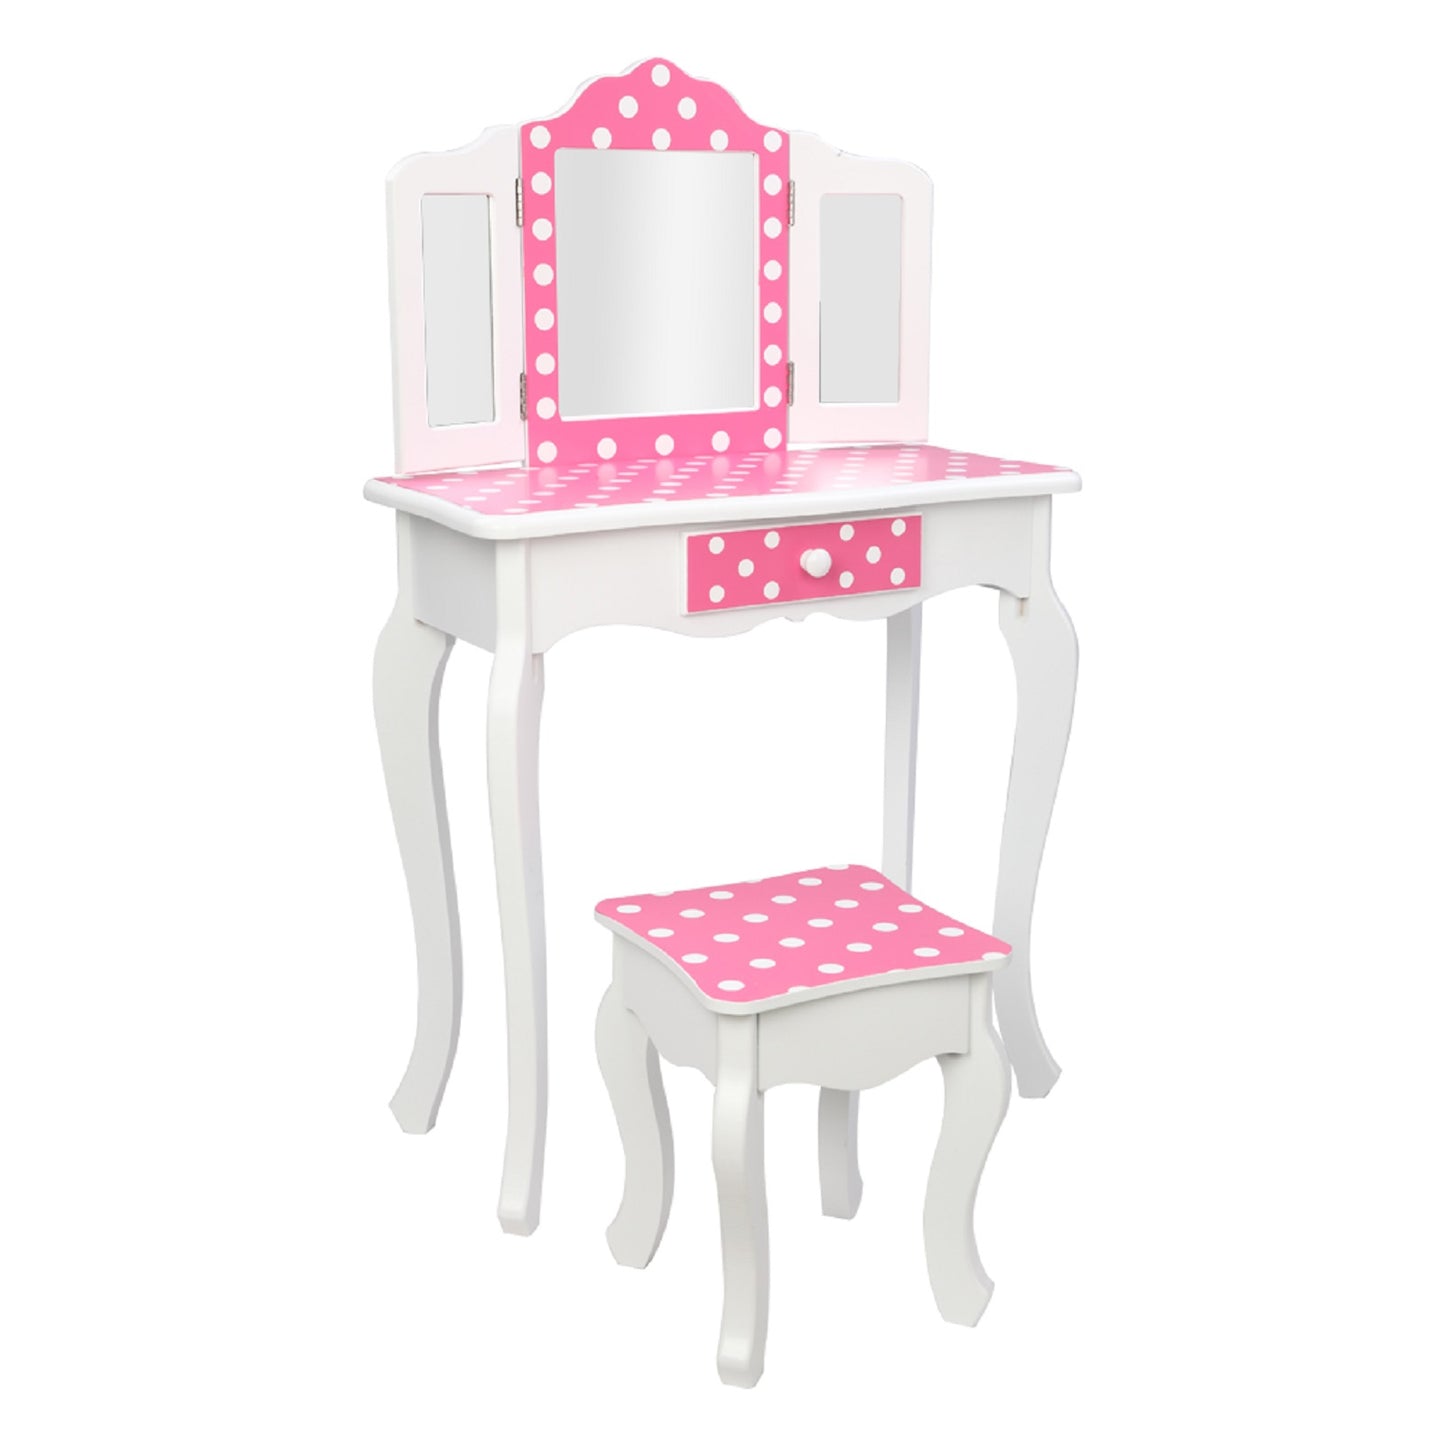 Smuxee Wood Kids Small White Vanity Set for Girls with 3-Fold Mirror,Child Makeup Table